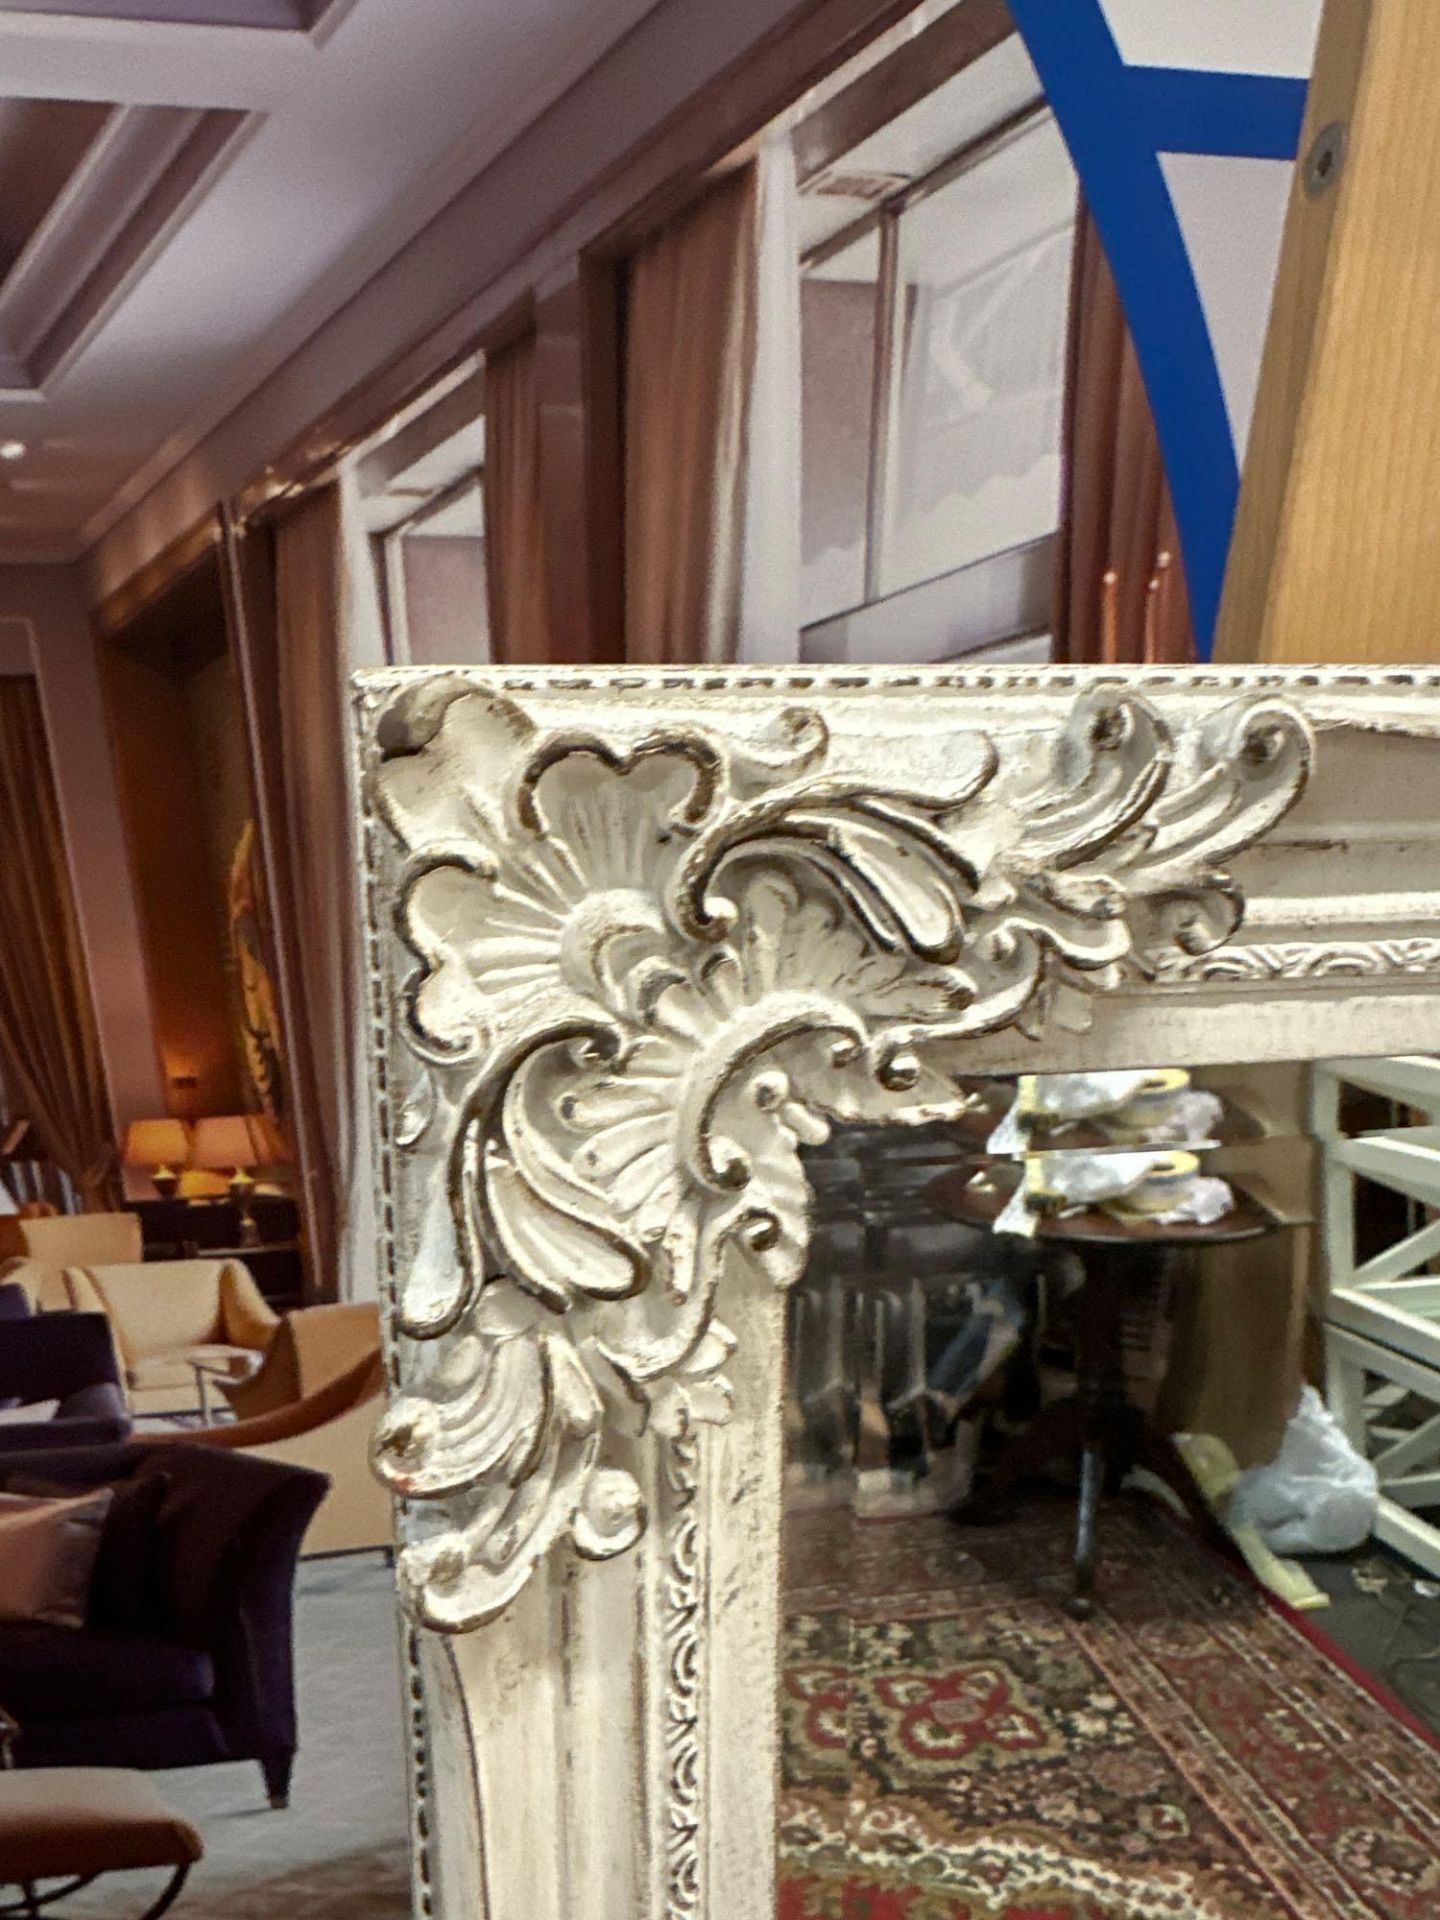 Fiennes Rectangular Mirror In Antique White A Beautiful Mirror Is Always A Welcome Addition To Any - Image 2 of 3